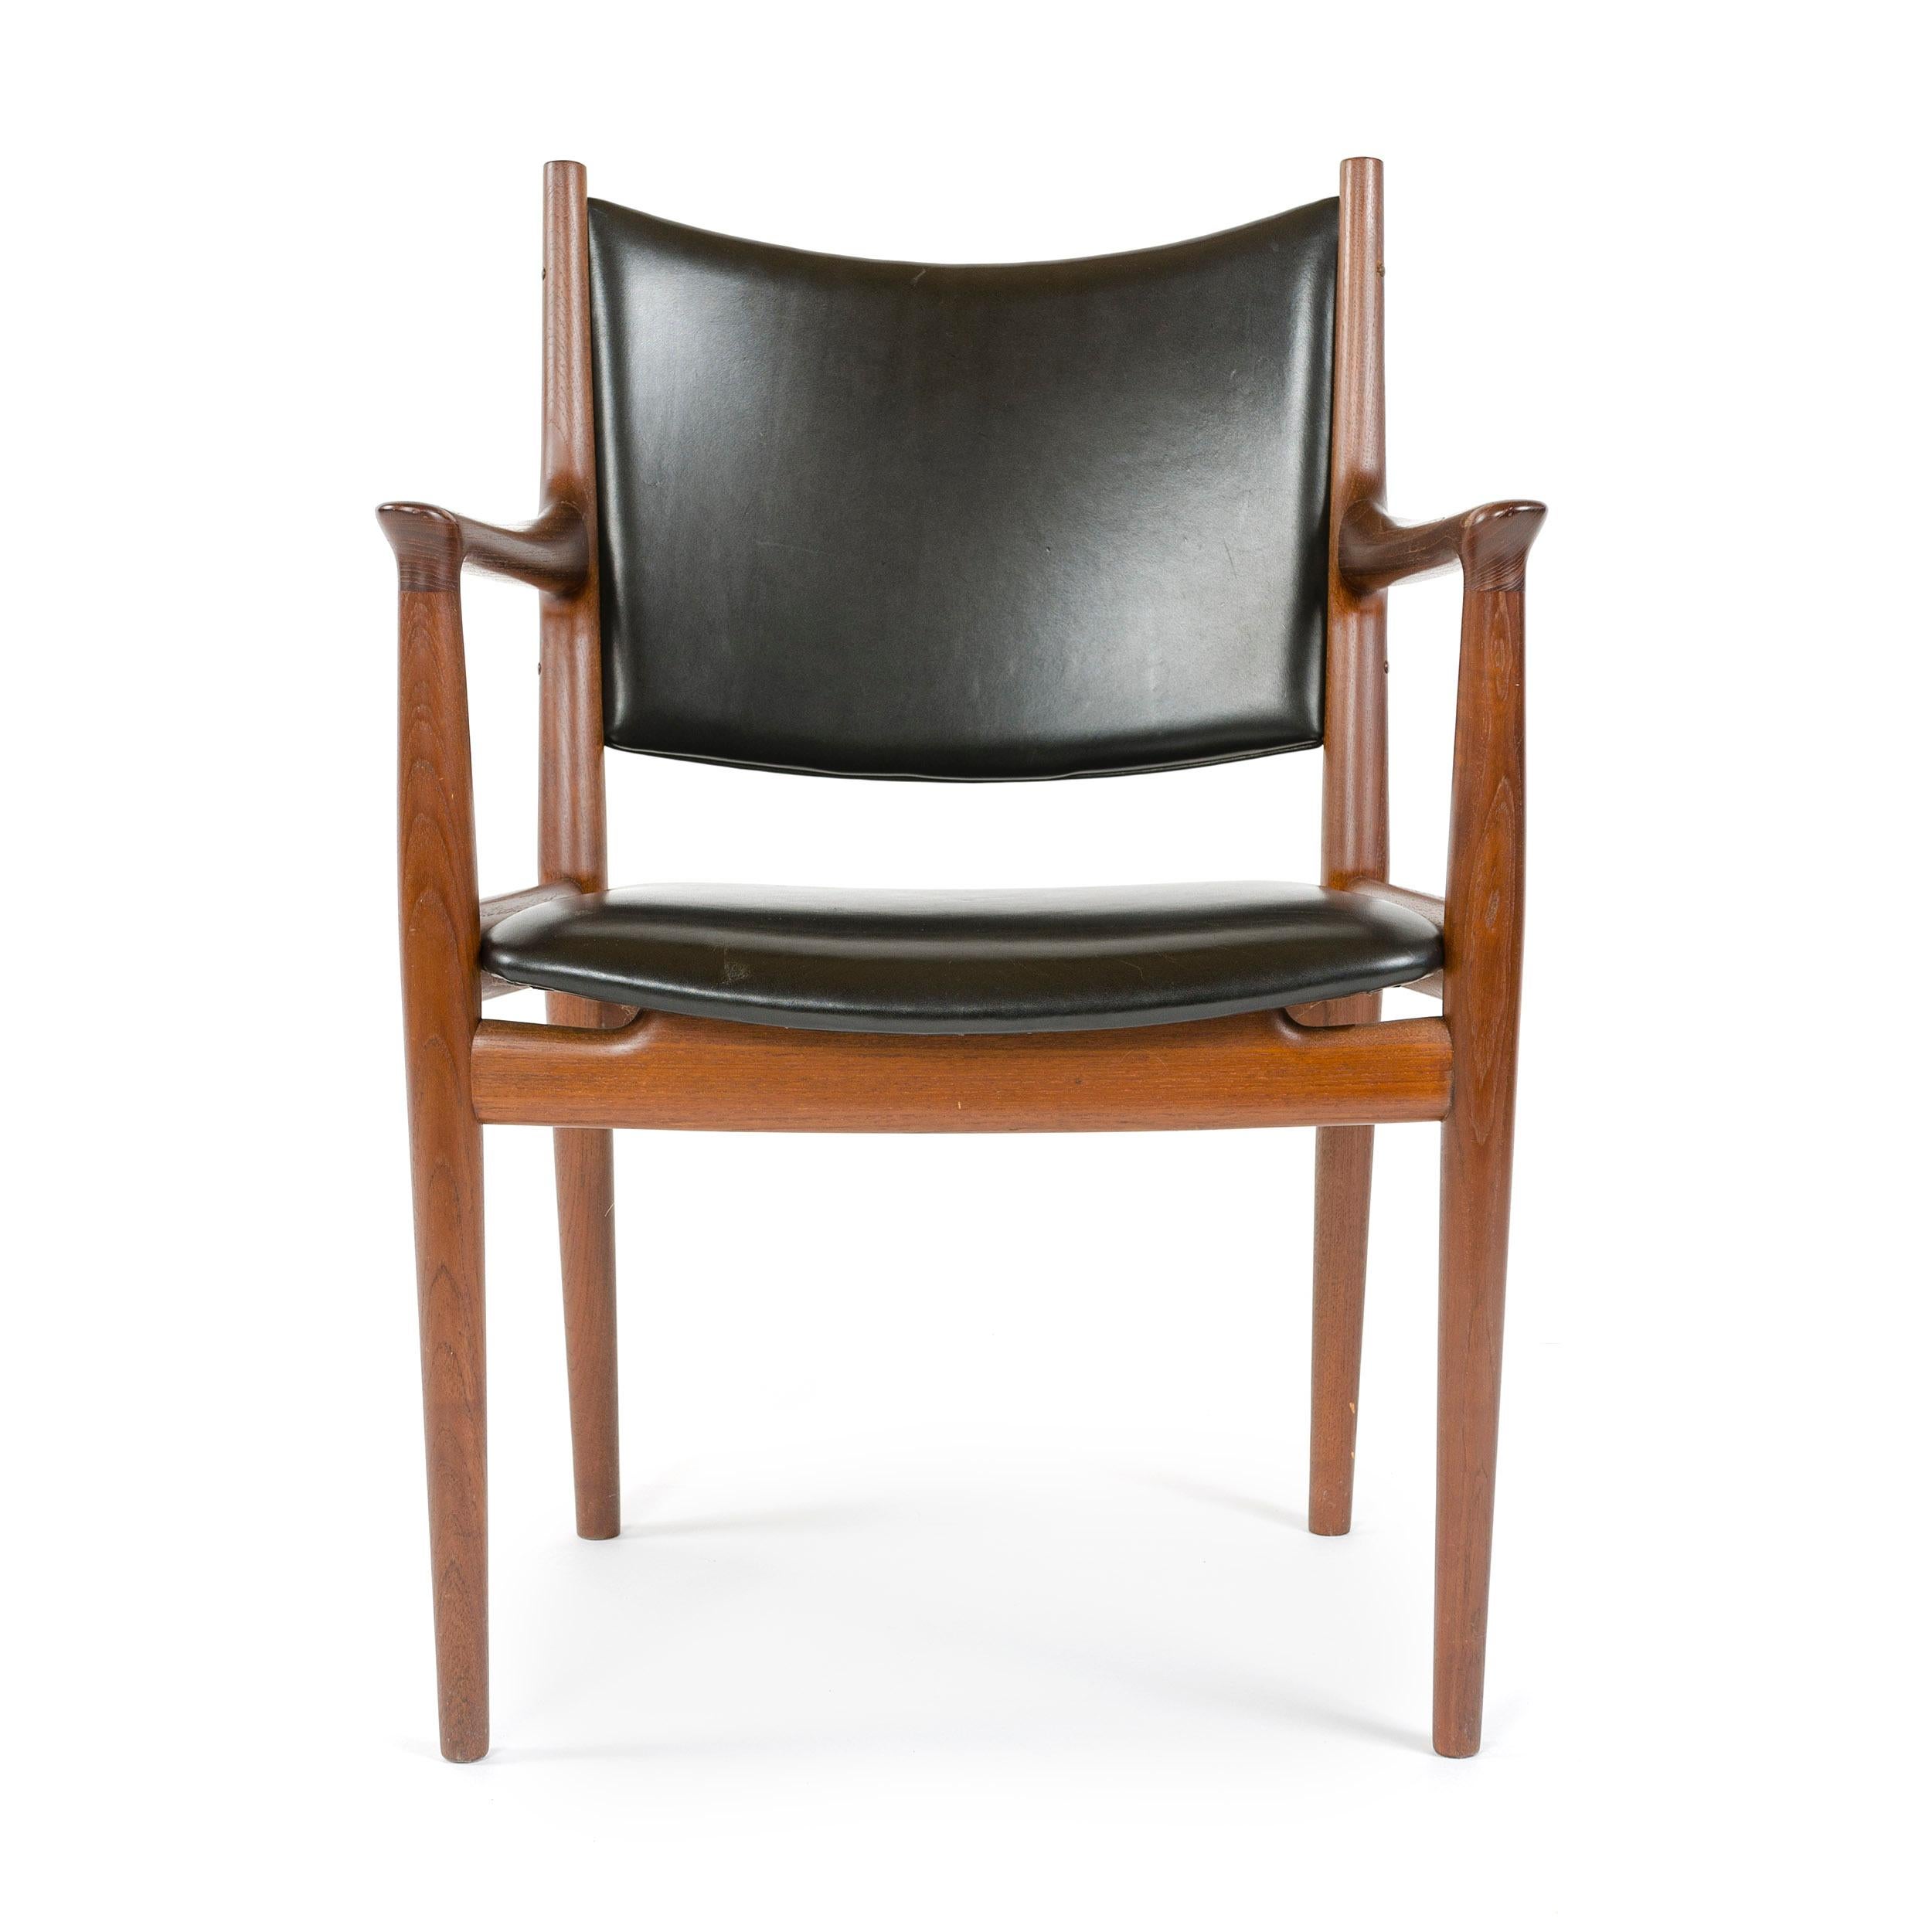 An elegant handcrafted dining chair, having an exposed teak frame and leather upholstery.